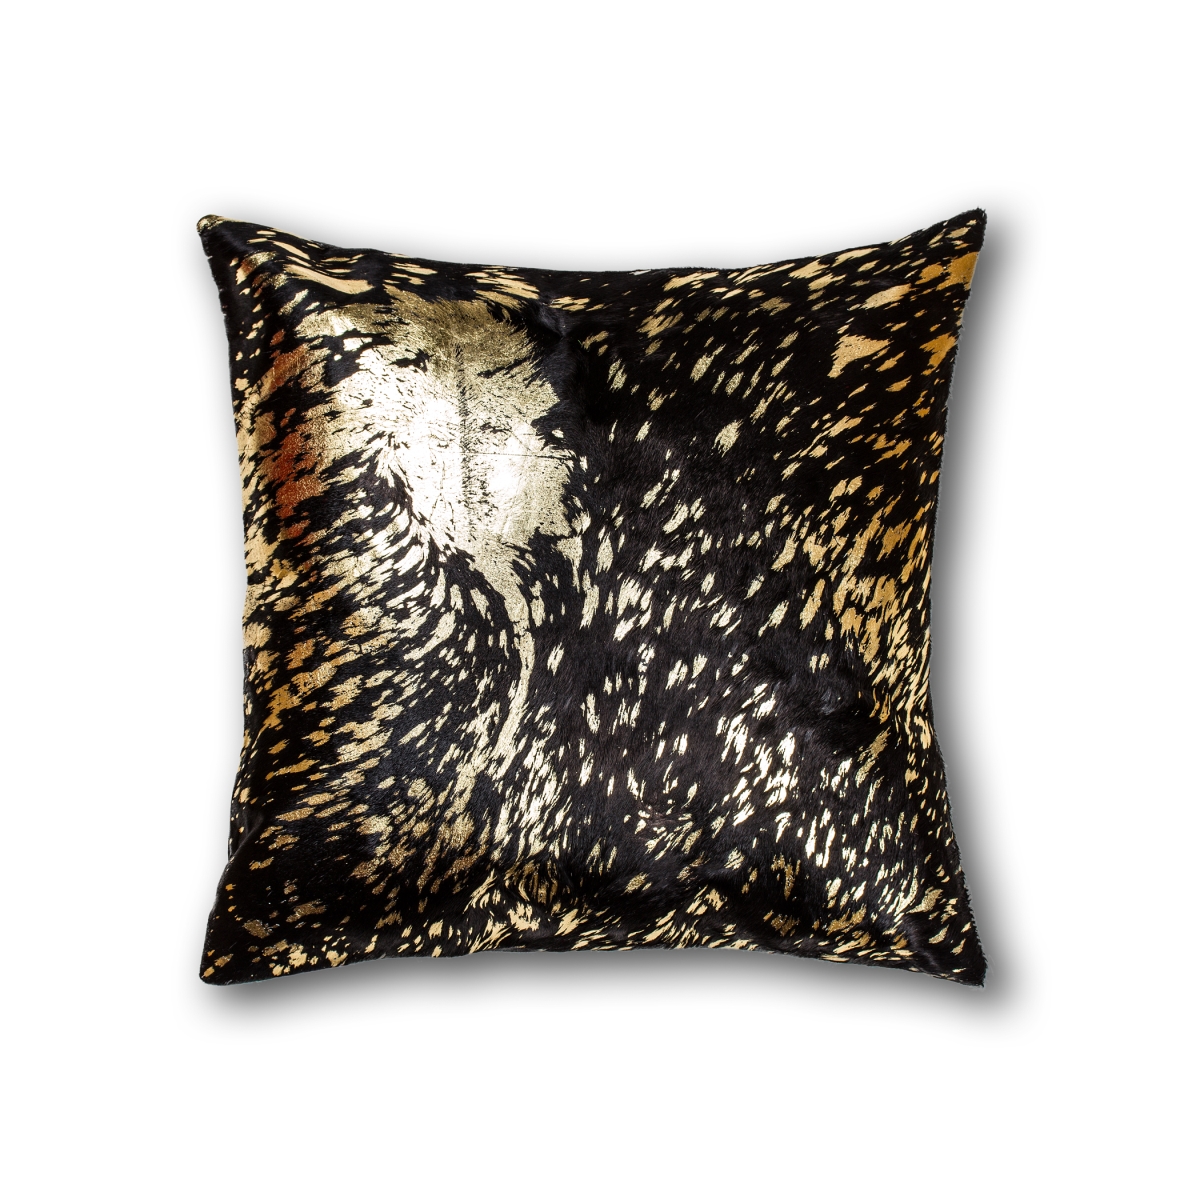 676685013453 18 X 18 In. Torino Scotland Cowhide Pillow - Chocolate & Gold